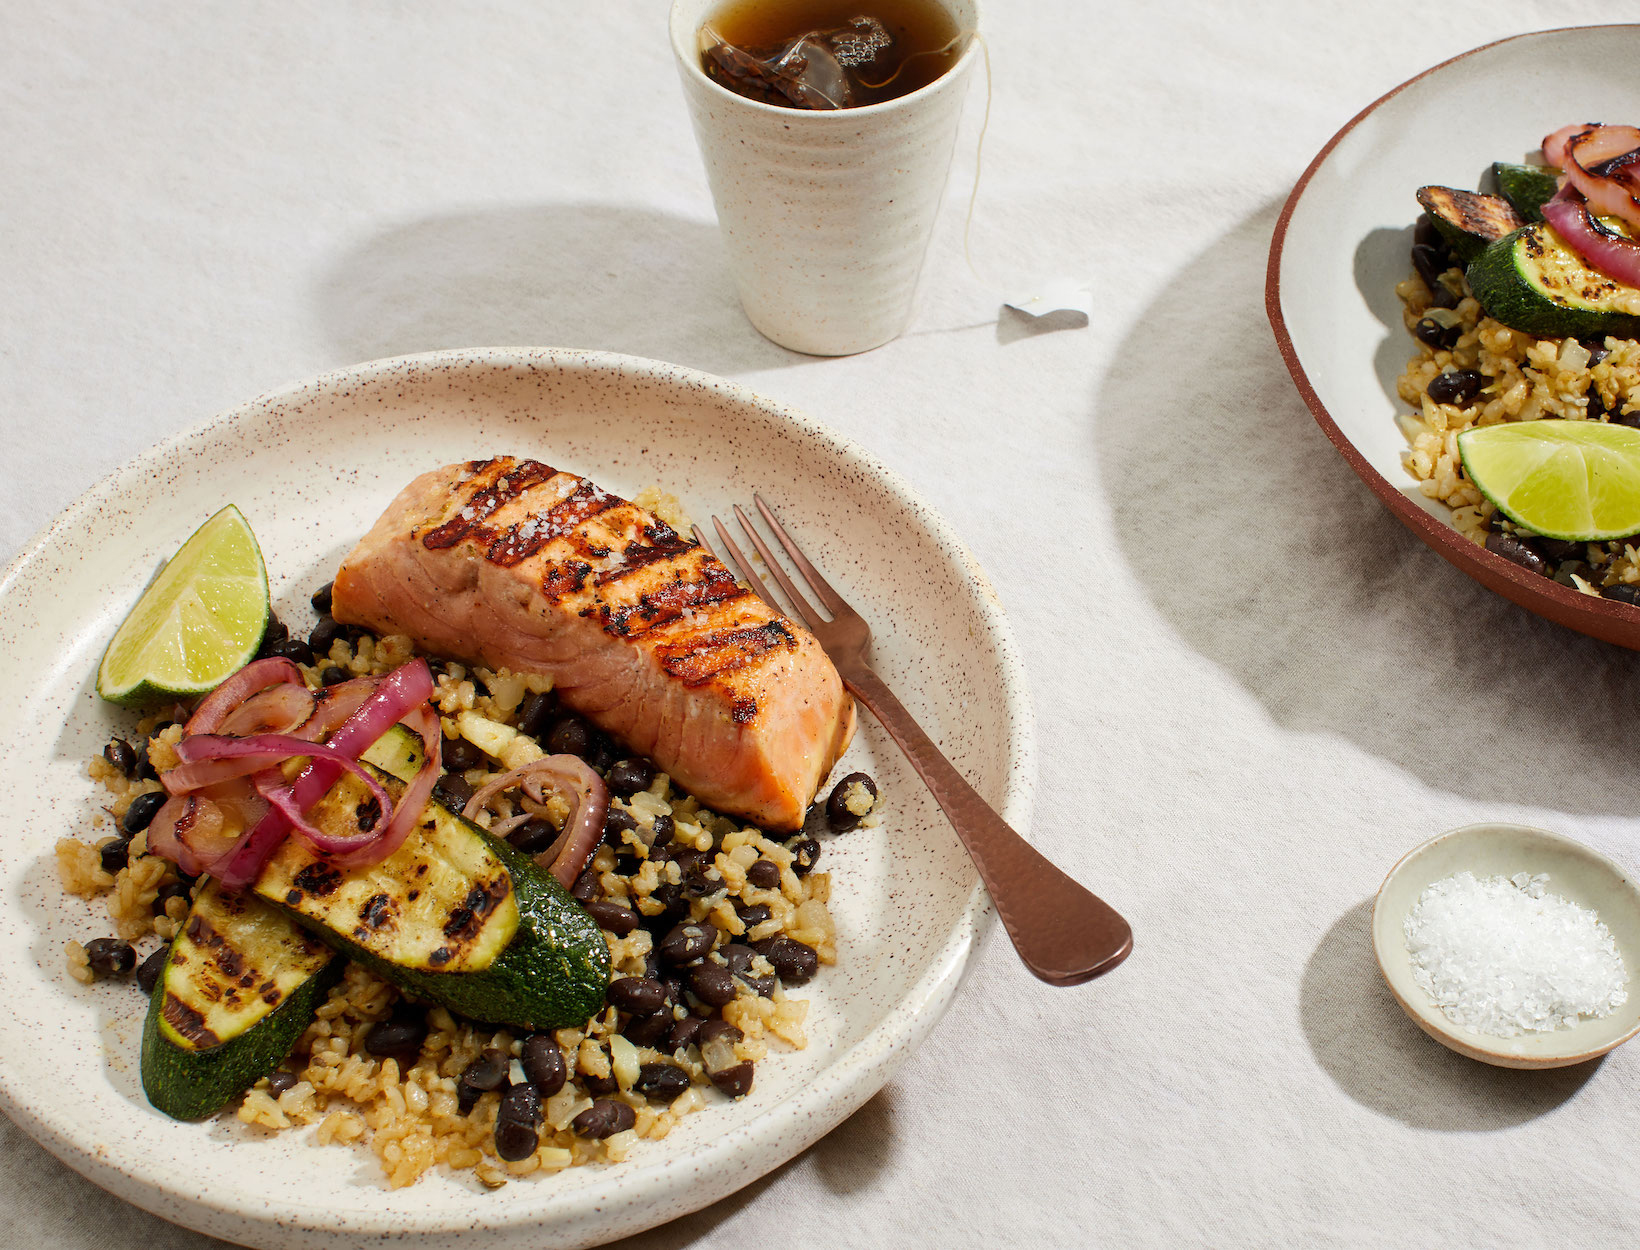 Grilled Mojo Salmon and Veggies with Black Beans and Brown-Cauli Rice Blend